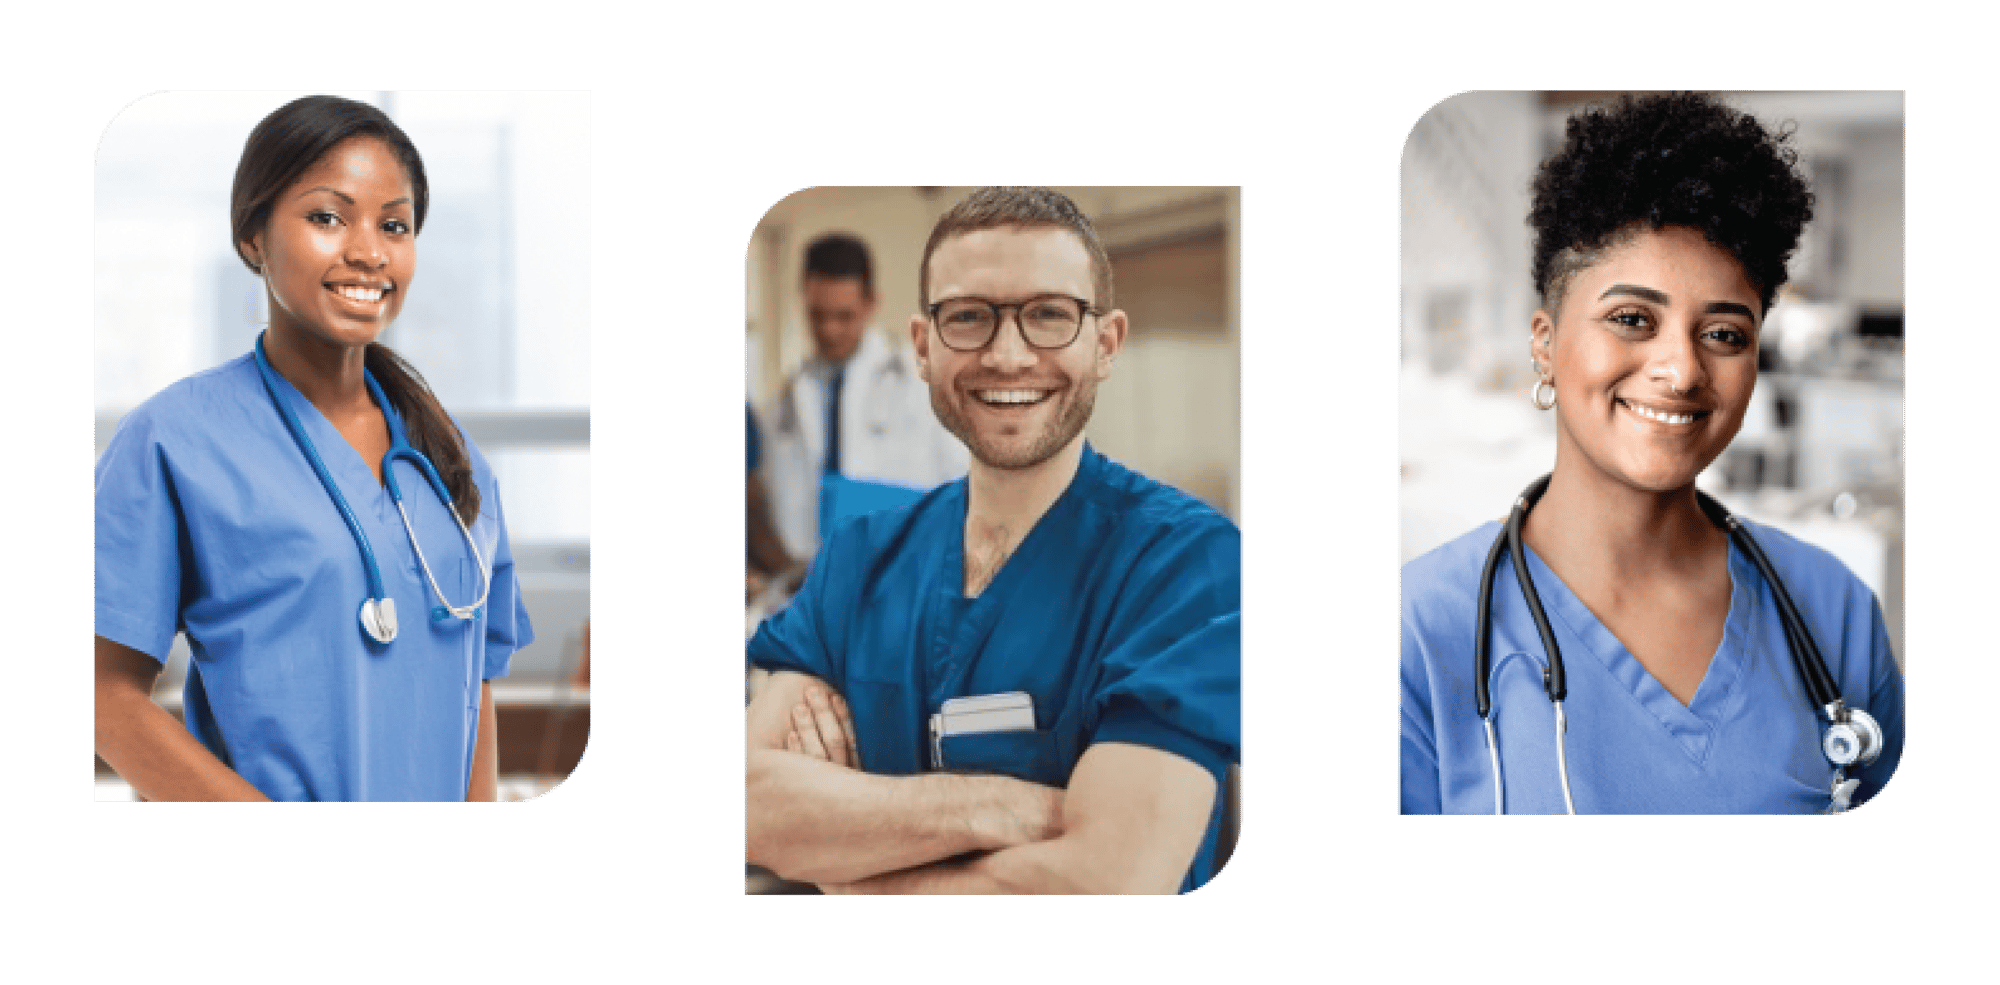 three medical professionals in different settings smiling